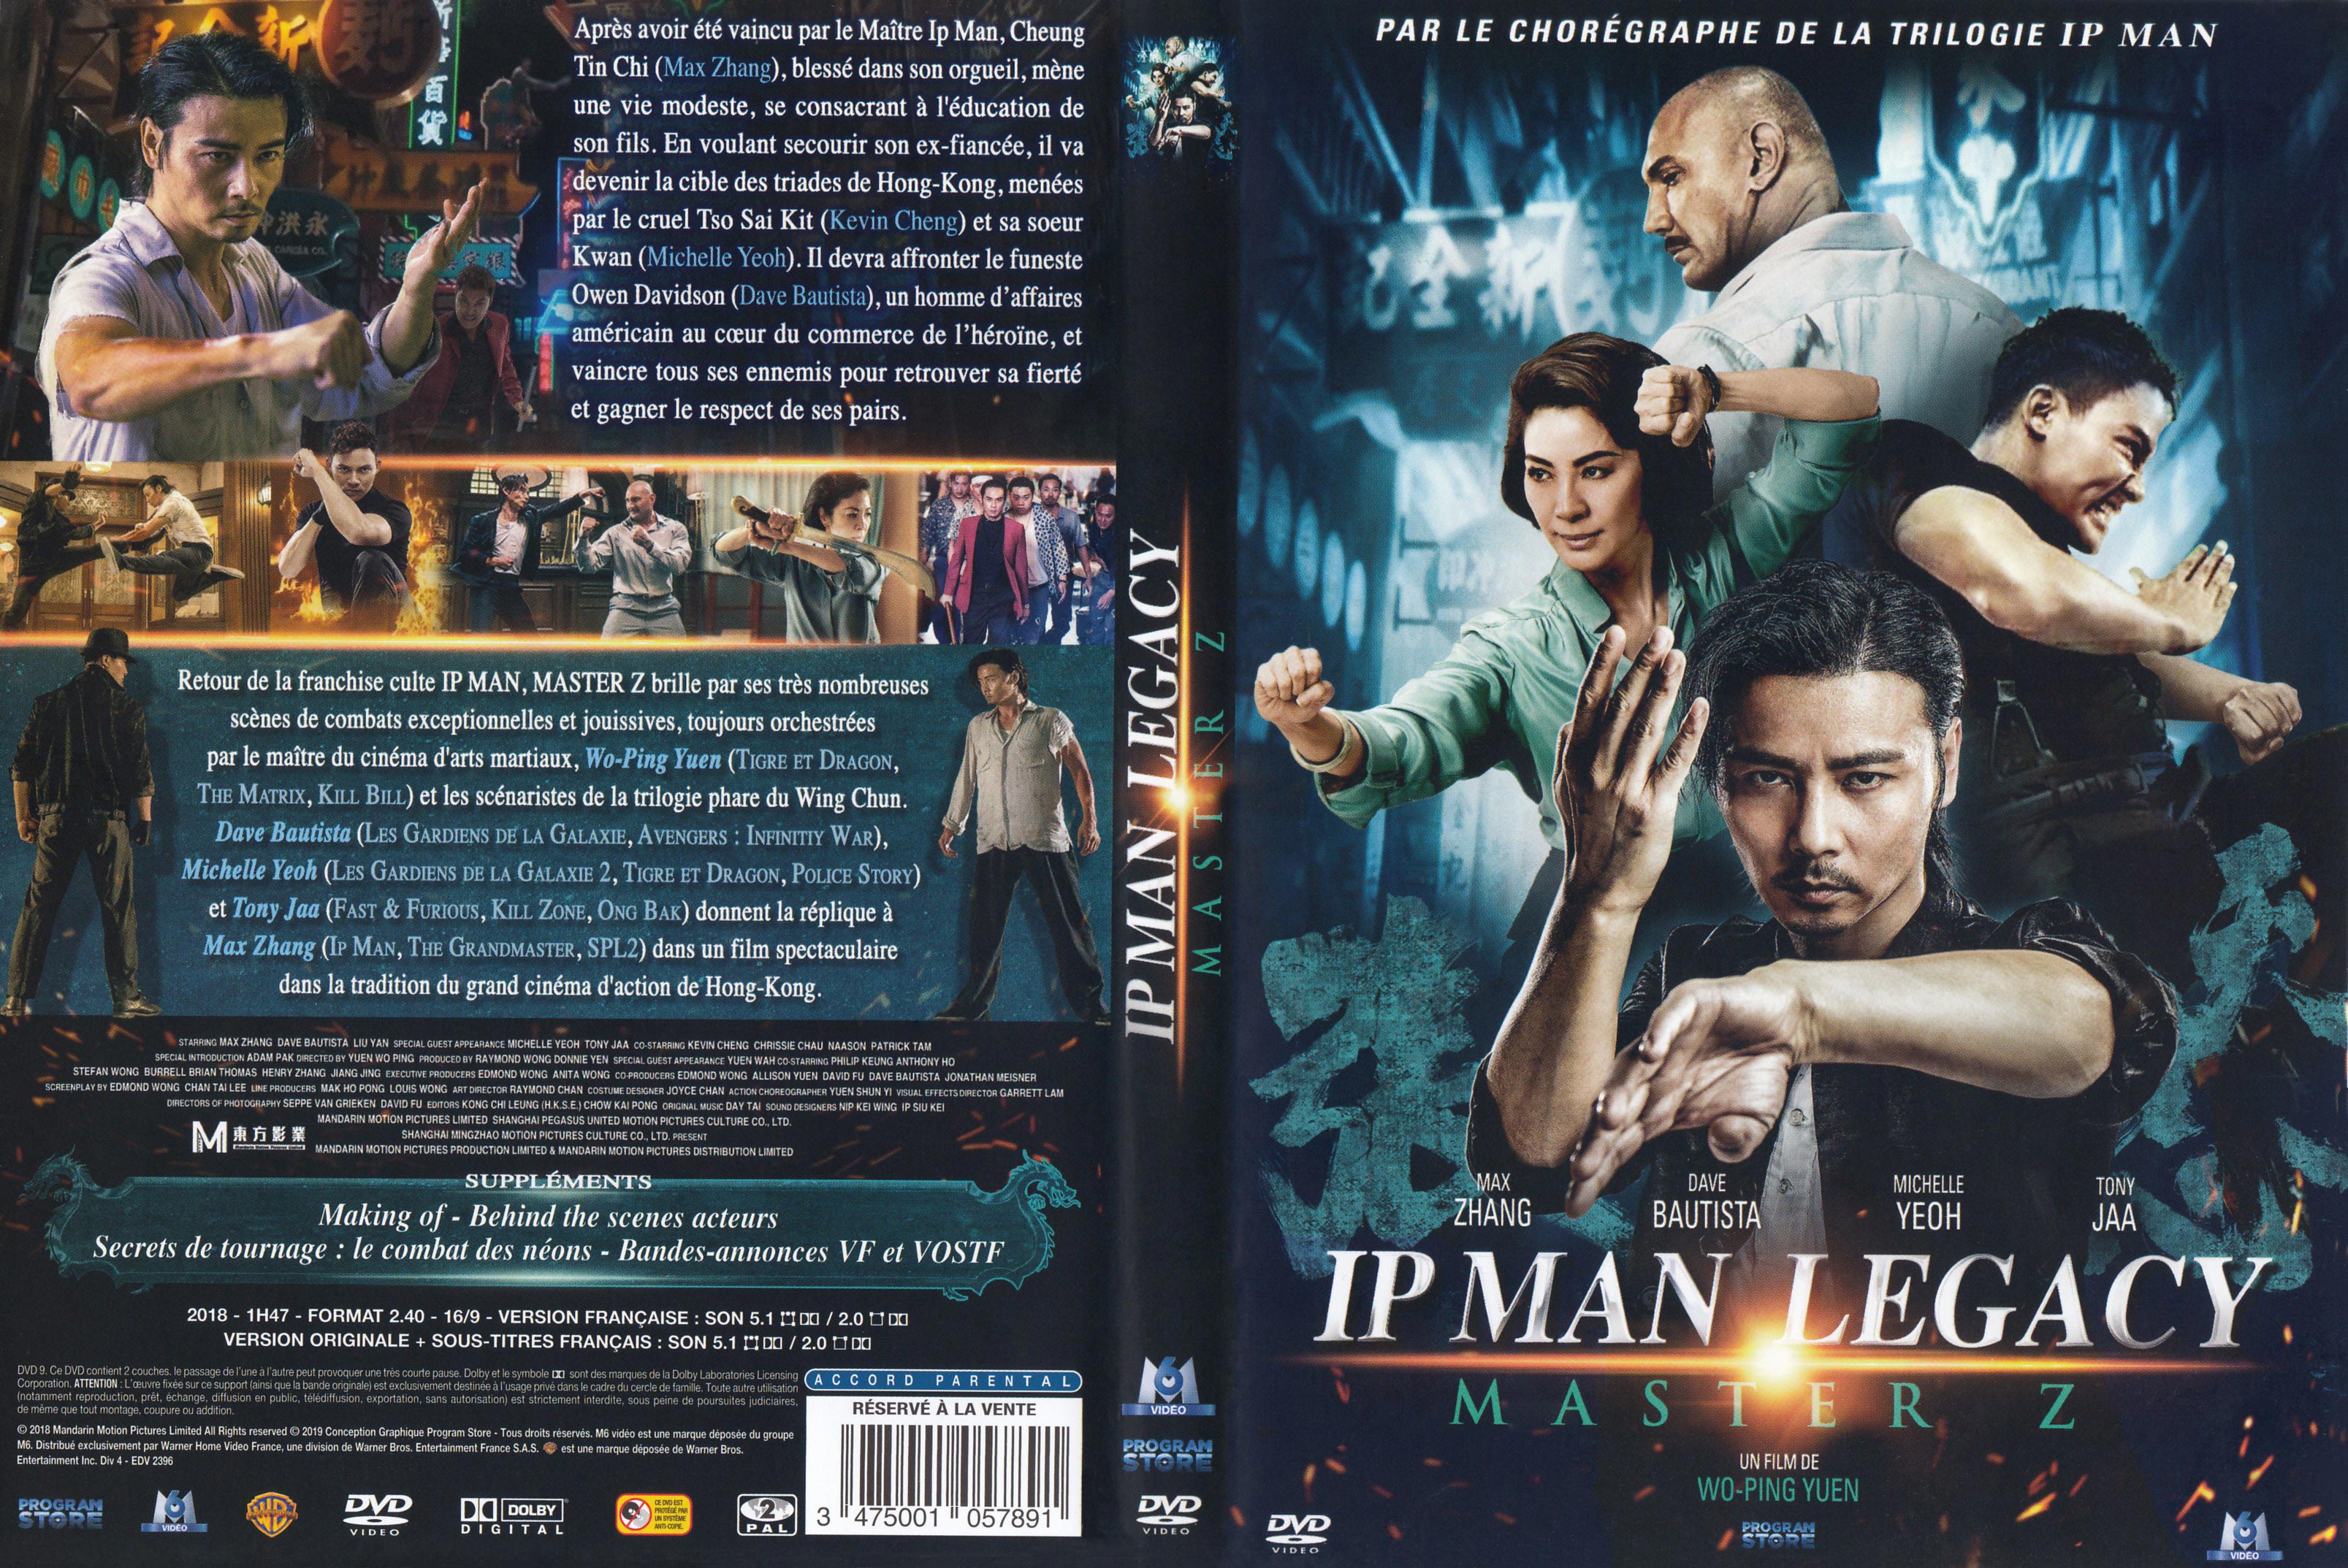 Jaquette DVD Ip man legacy Master Z